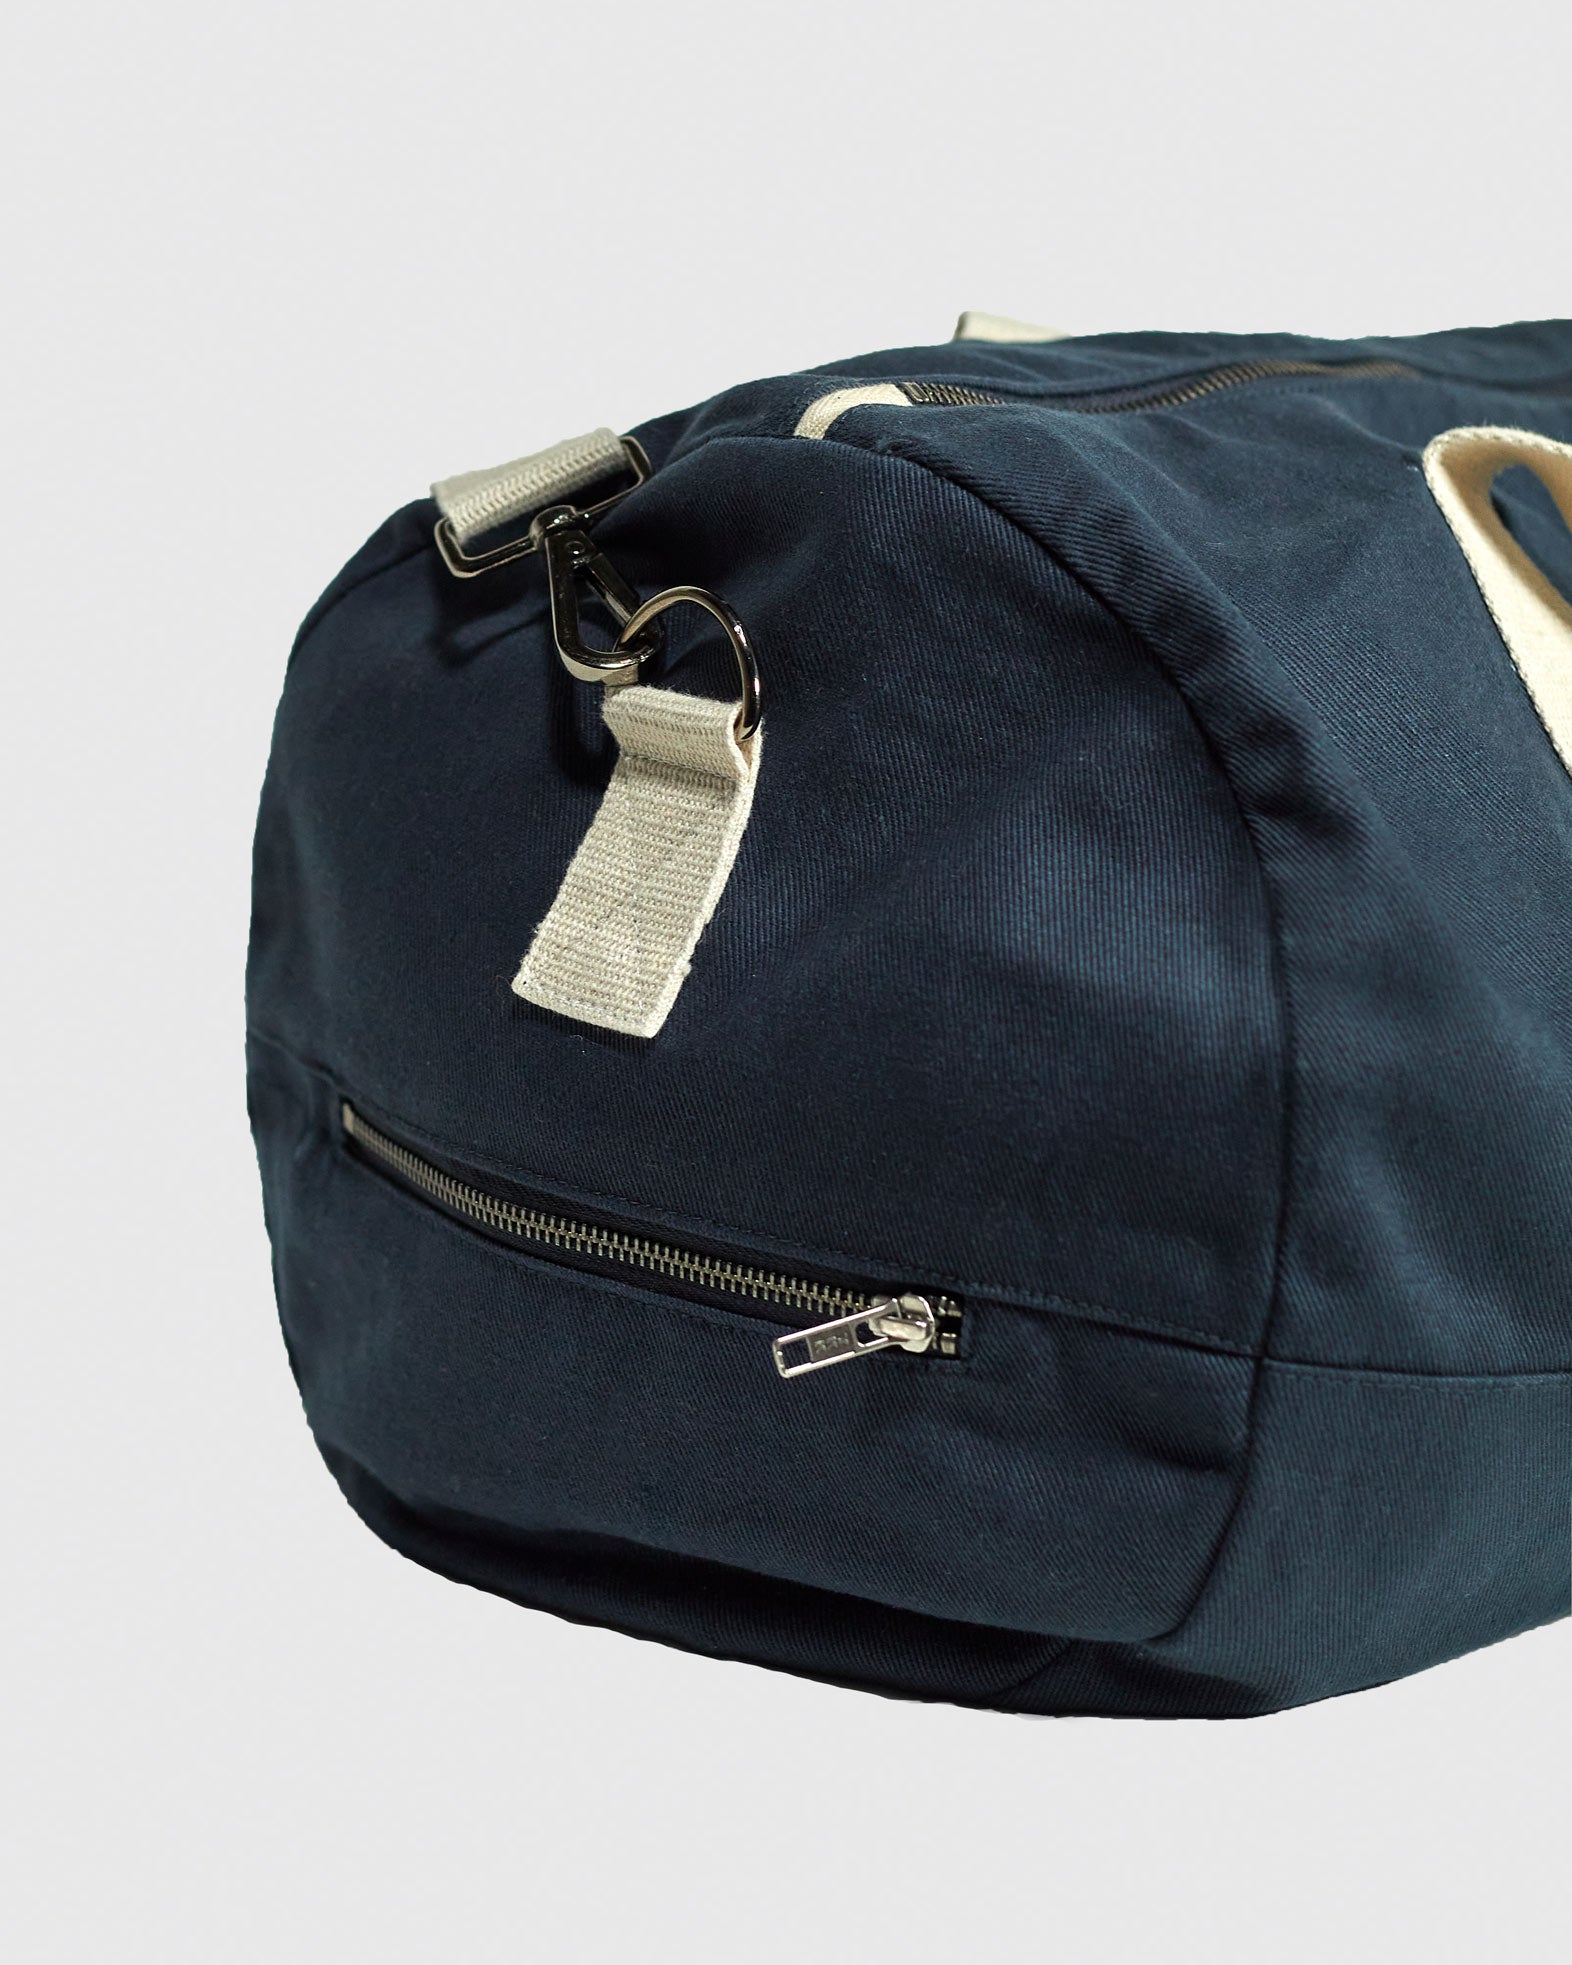 Focus on end of Uskees #0403 barrel bag in bluberry cotton drill, showing end zipper pocket and cotton webbing carry handle attachment.